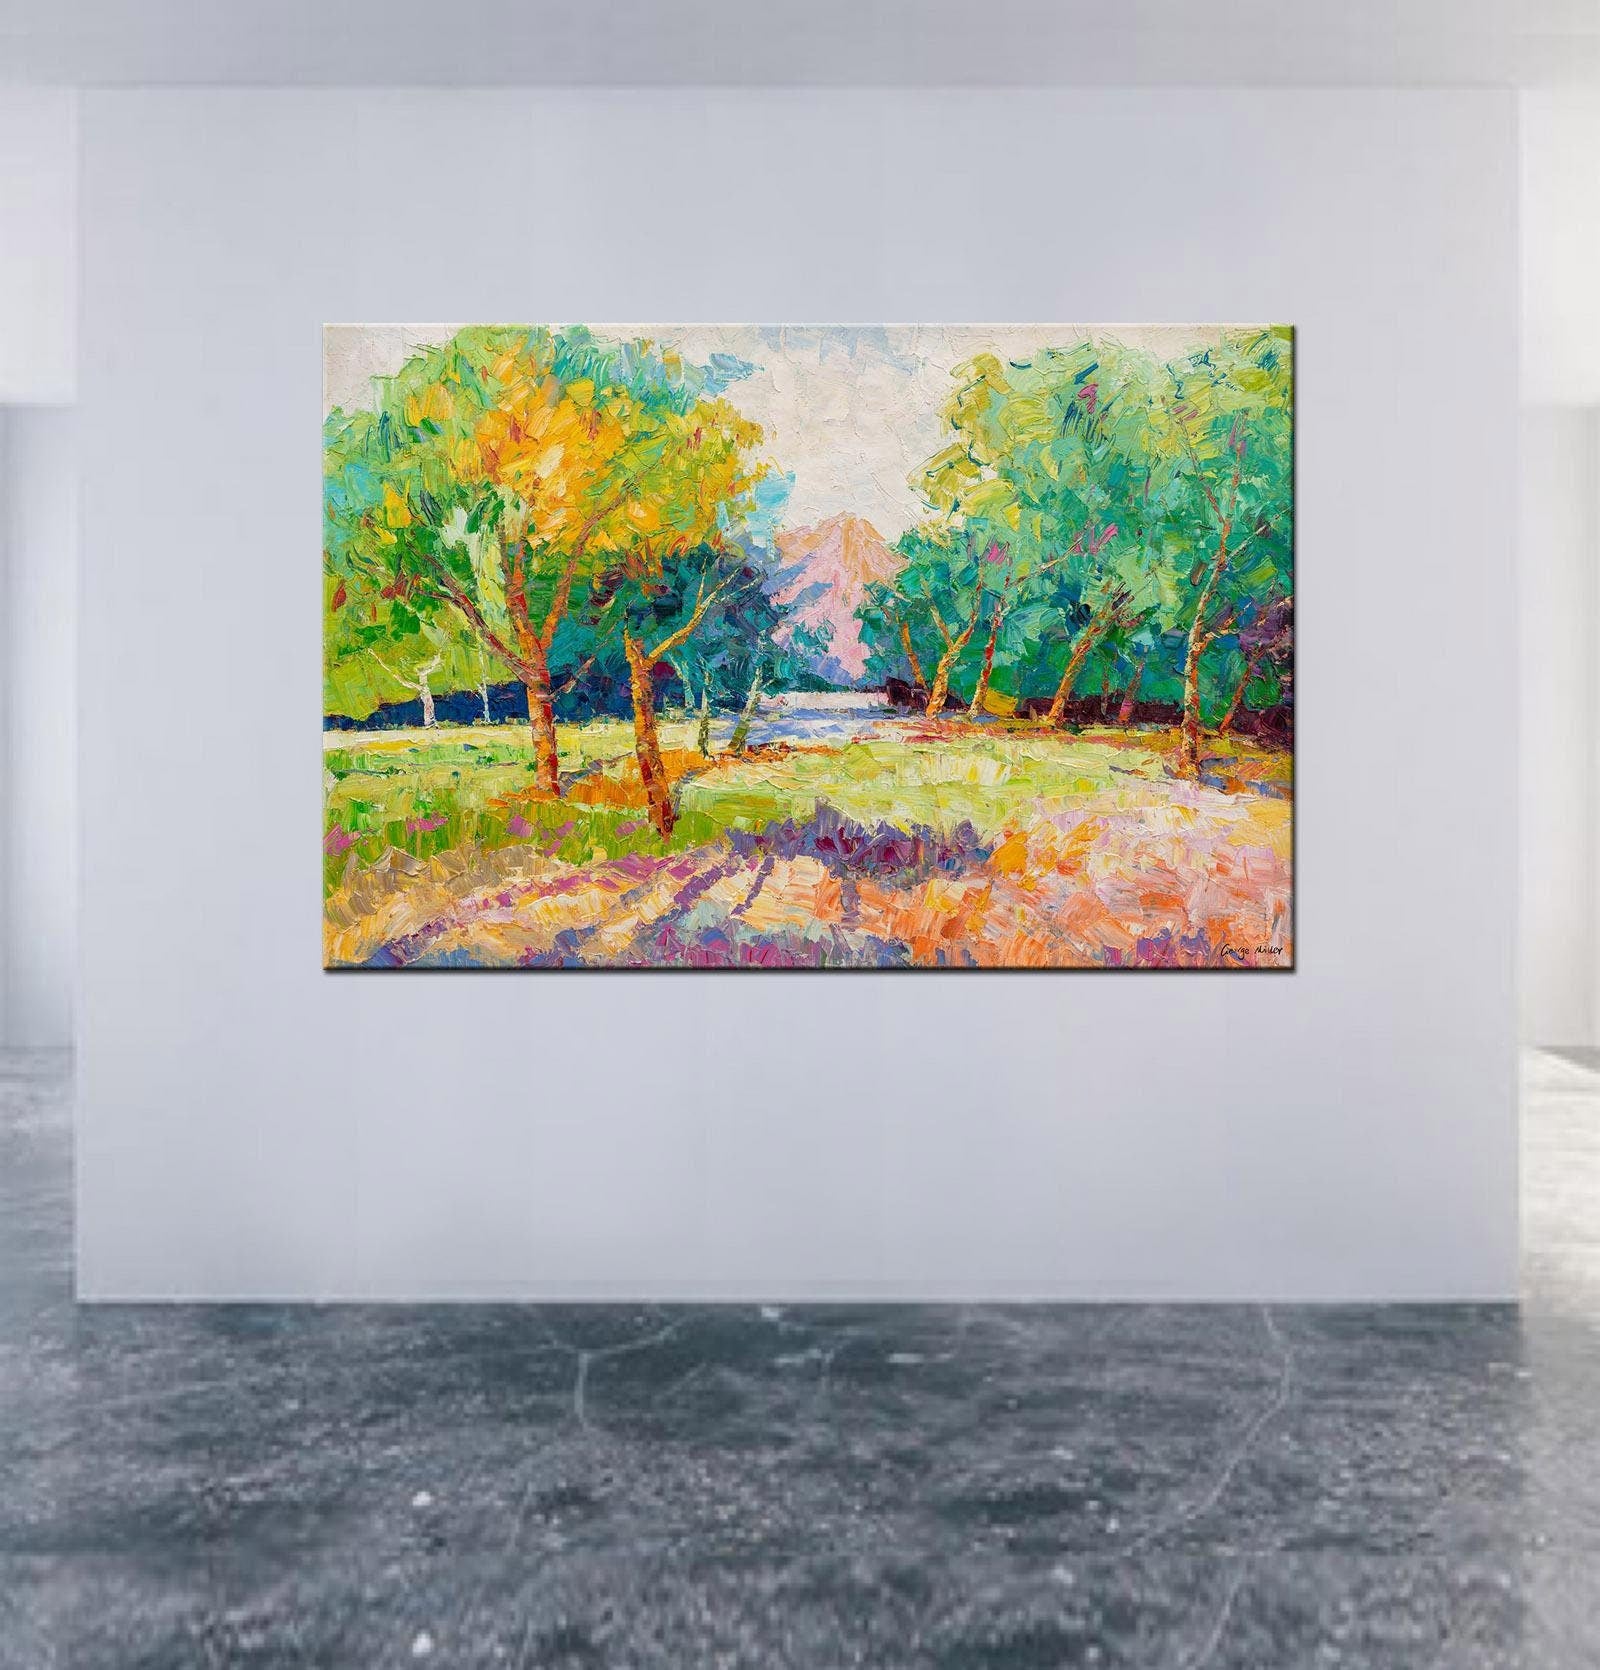 Spring Landscape Oil Painting, Artwork, Oil Painting, Large Landscape Paintings On Canvas, Oversized Wall Art, Impasto Painting